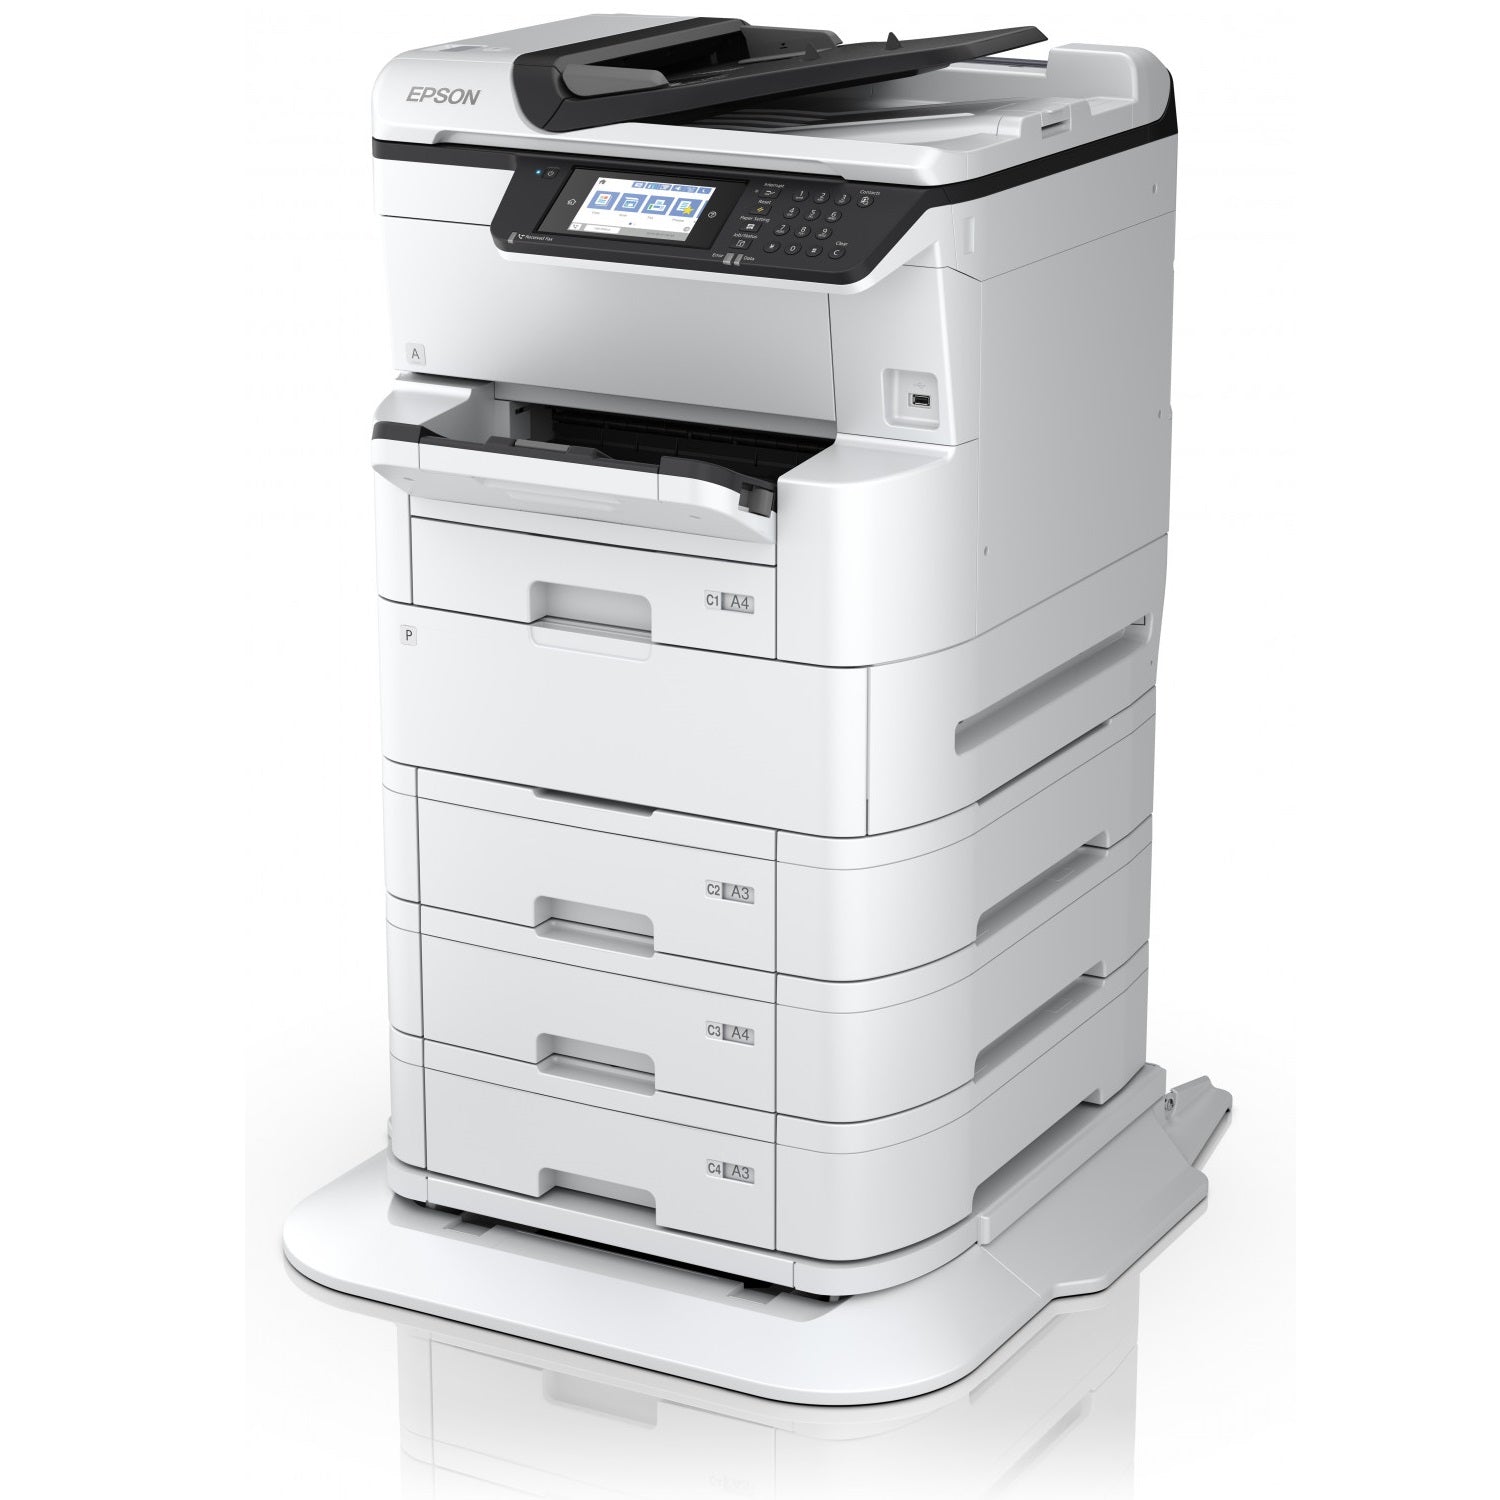 Absolute Toner $52/Month New Epson WorkForce Pro WF-C879R Multifunction Color Printer, Available For Sale in Canada Showroom Color Copier